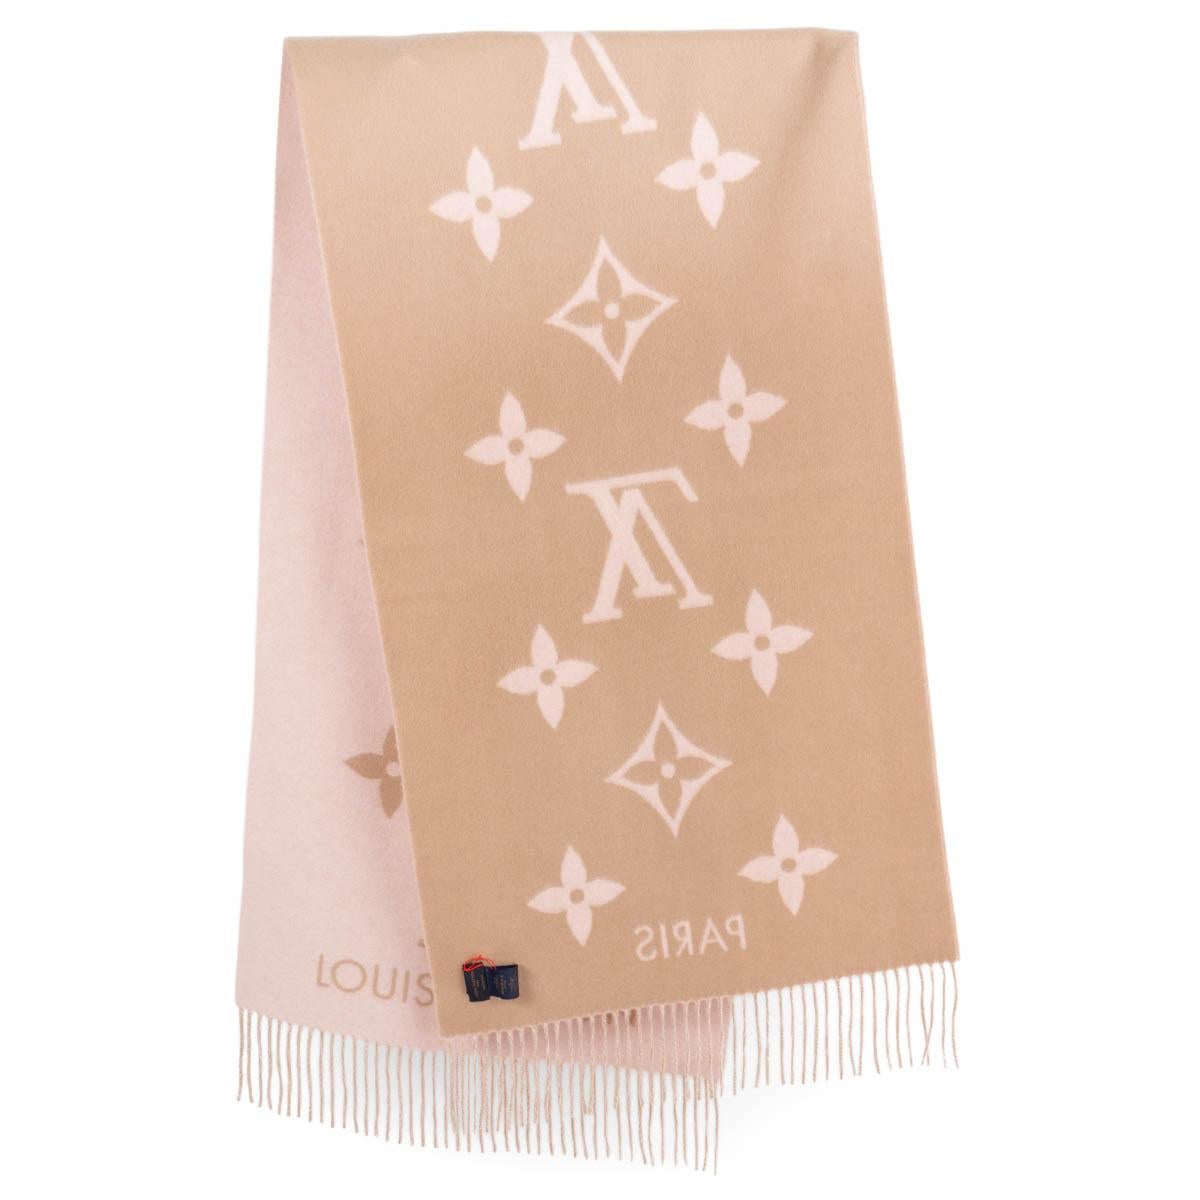 100% authentic Louis Vuitton Reykjavik extra-long scarf in pink and beige 100% cashmere features an enormous version of the house's famous Monogram pattern, accented by a Louis Vuitton Paris signature and delicate fringes at the ends. Has been worn